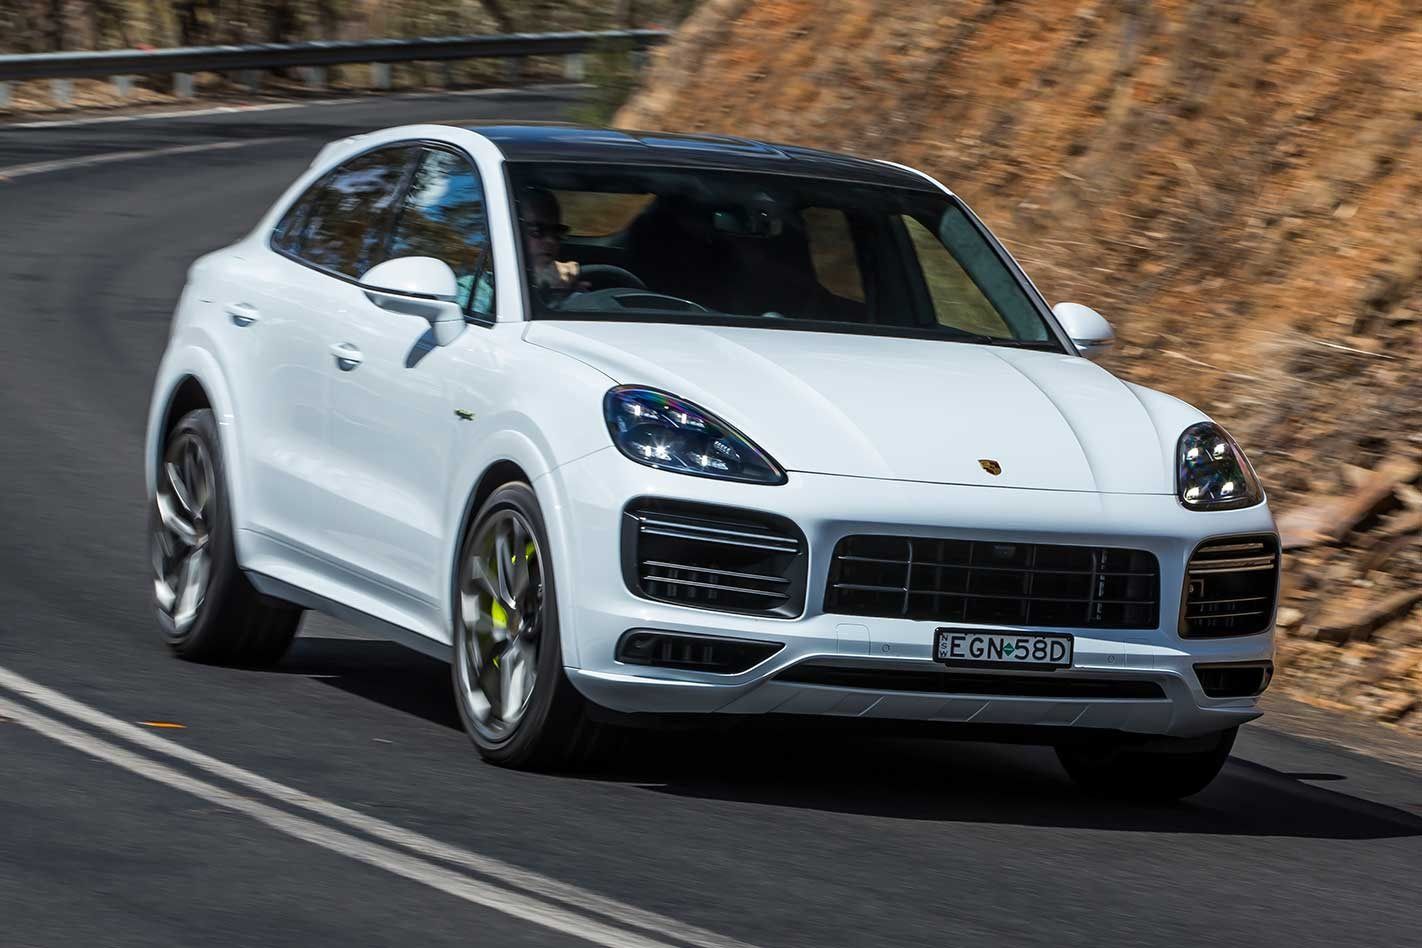 Porsche Cayenne Turbo S E-Hybrid Coupe on the highway